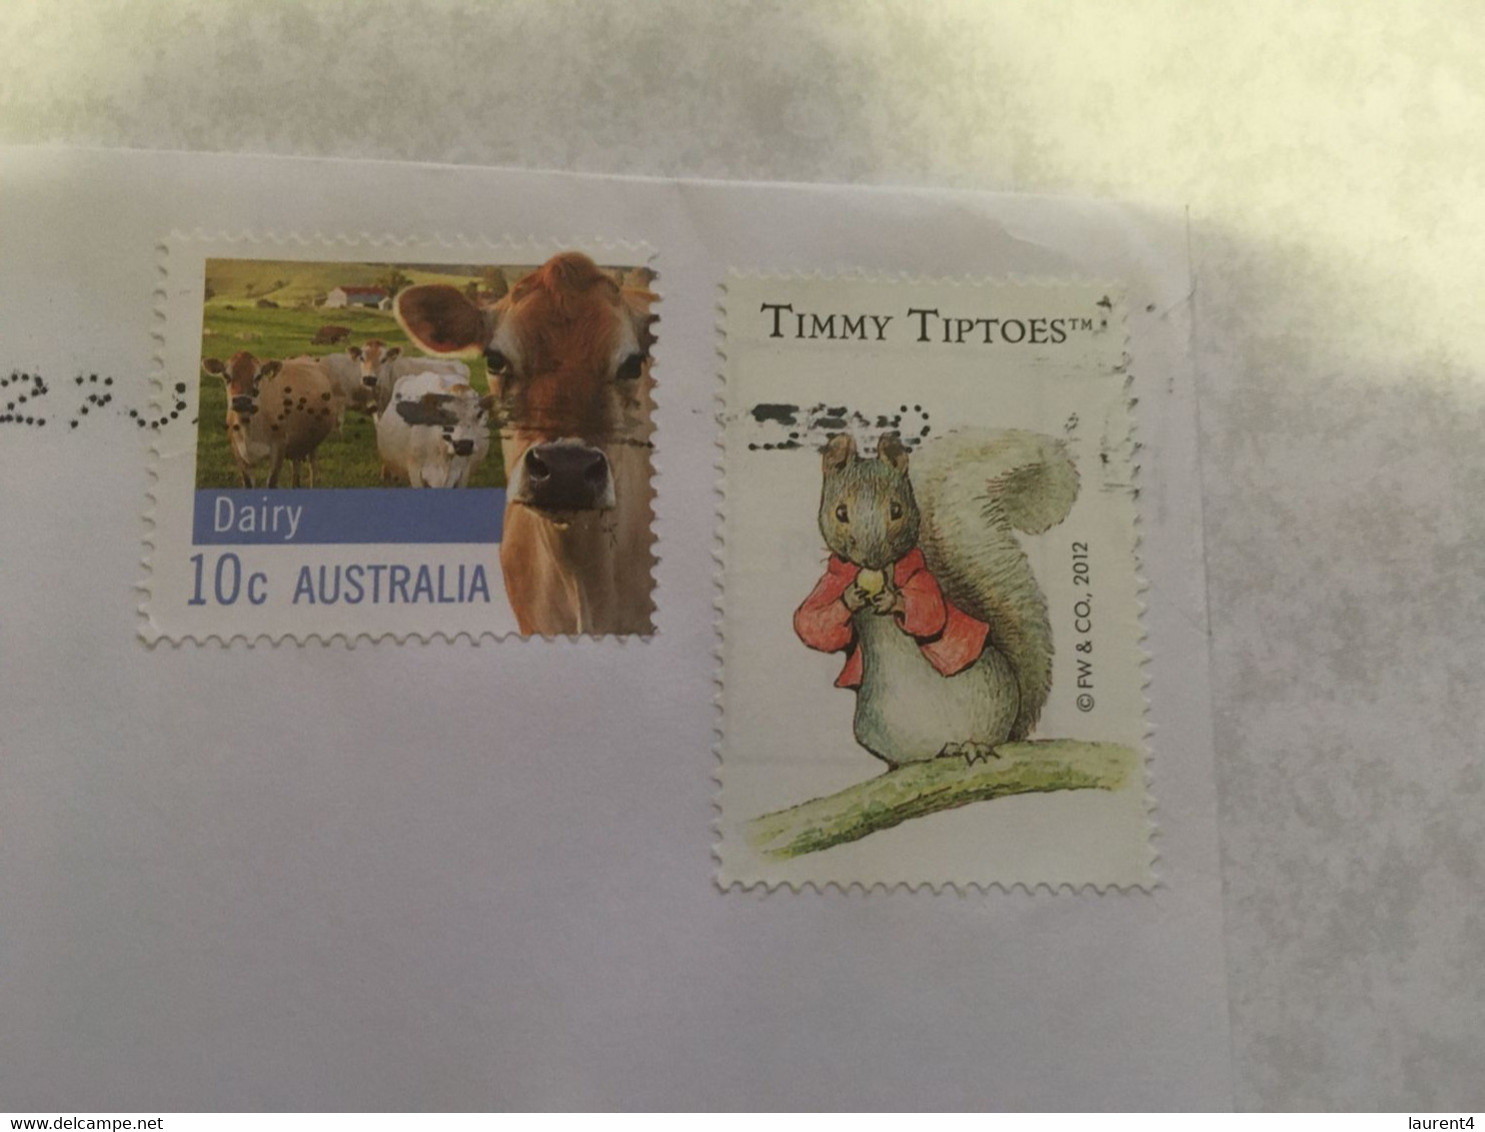 (Y 14) Australia - Postage Label ILLEGALLY Used As Postage (with Extra 10 Cent Stamp) - Errors, Freaks & Oddities (EFO)